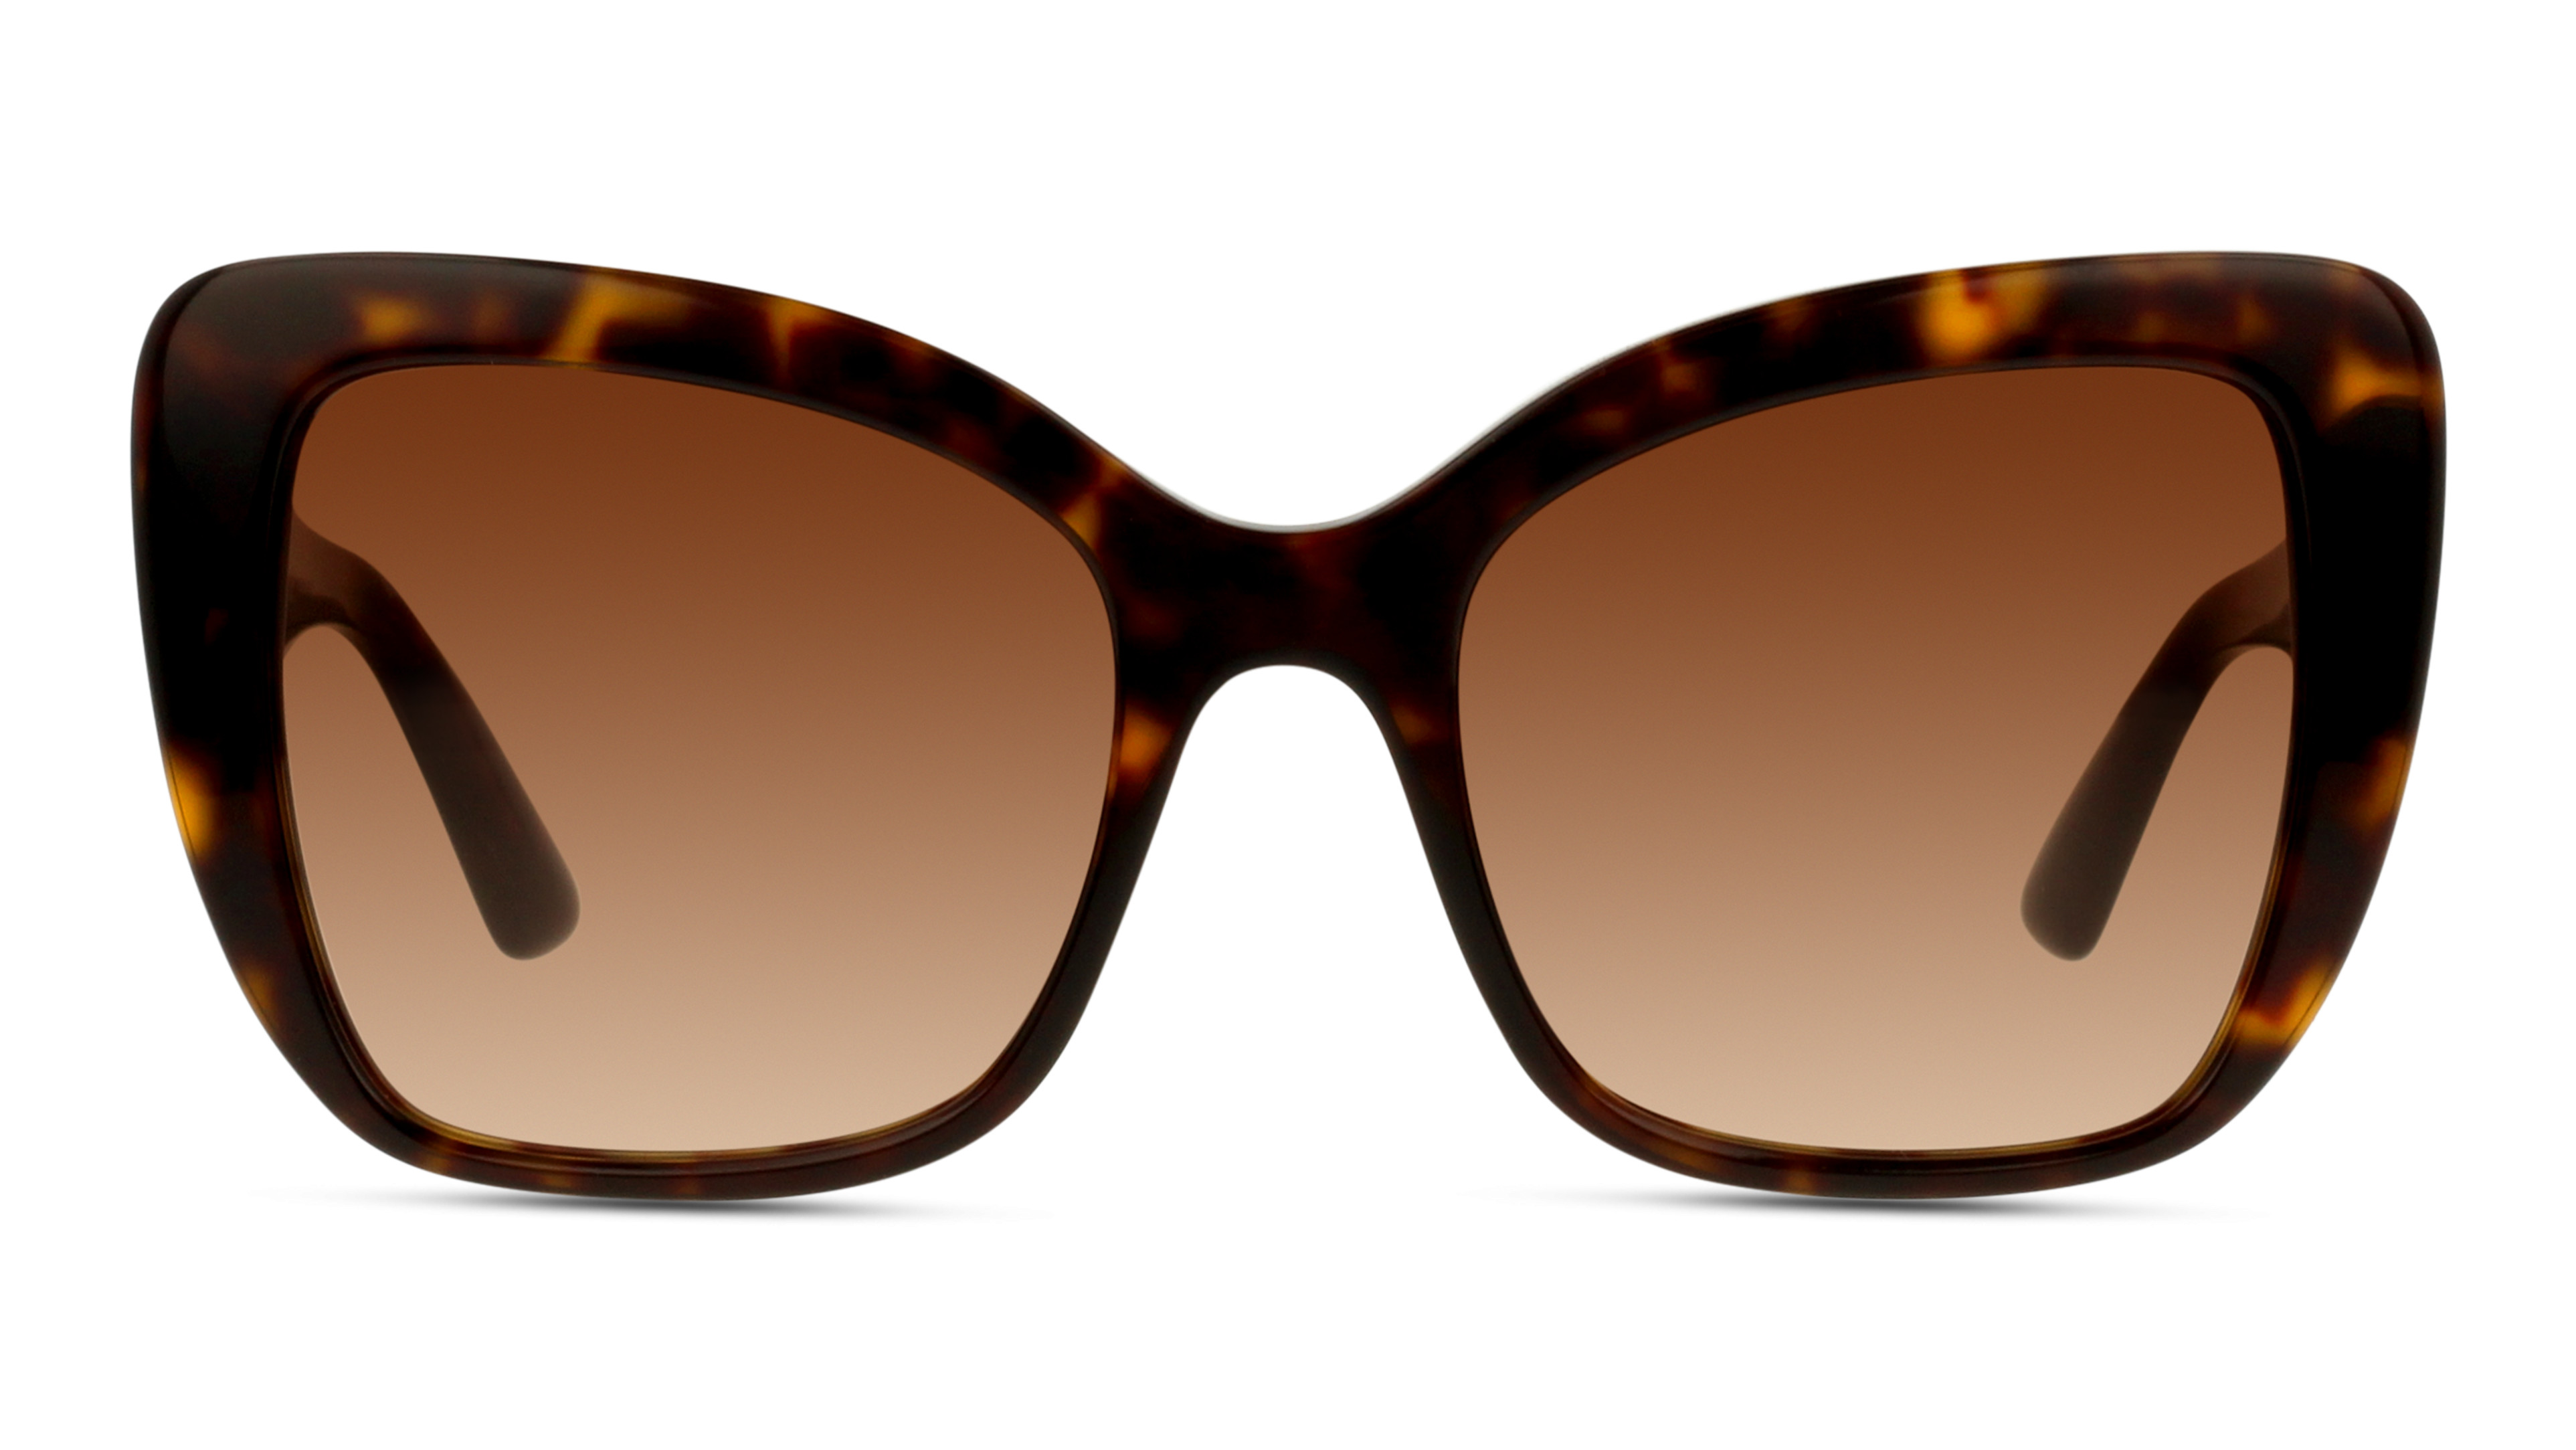 [products.image.front] Dolce&Gabbana Print Family 0DG4348 502/13 Sonnenbrille